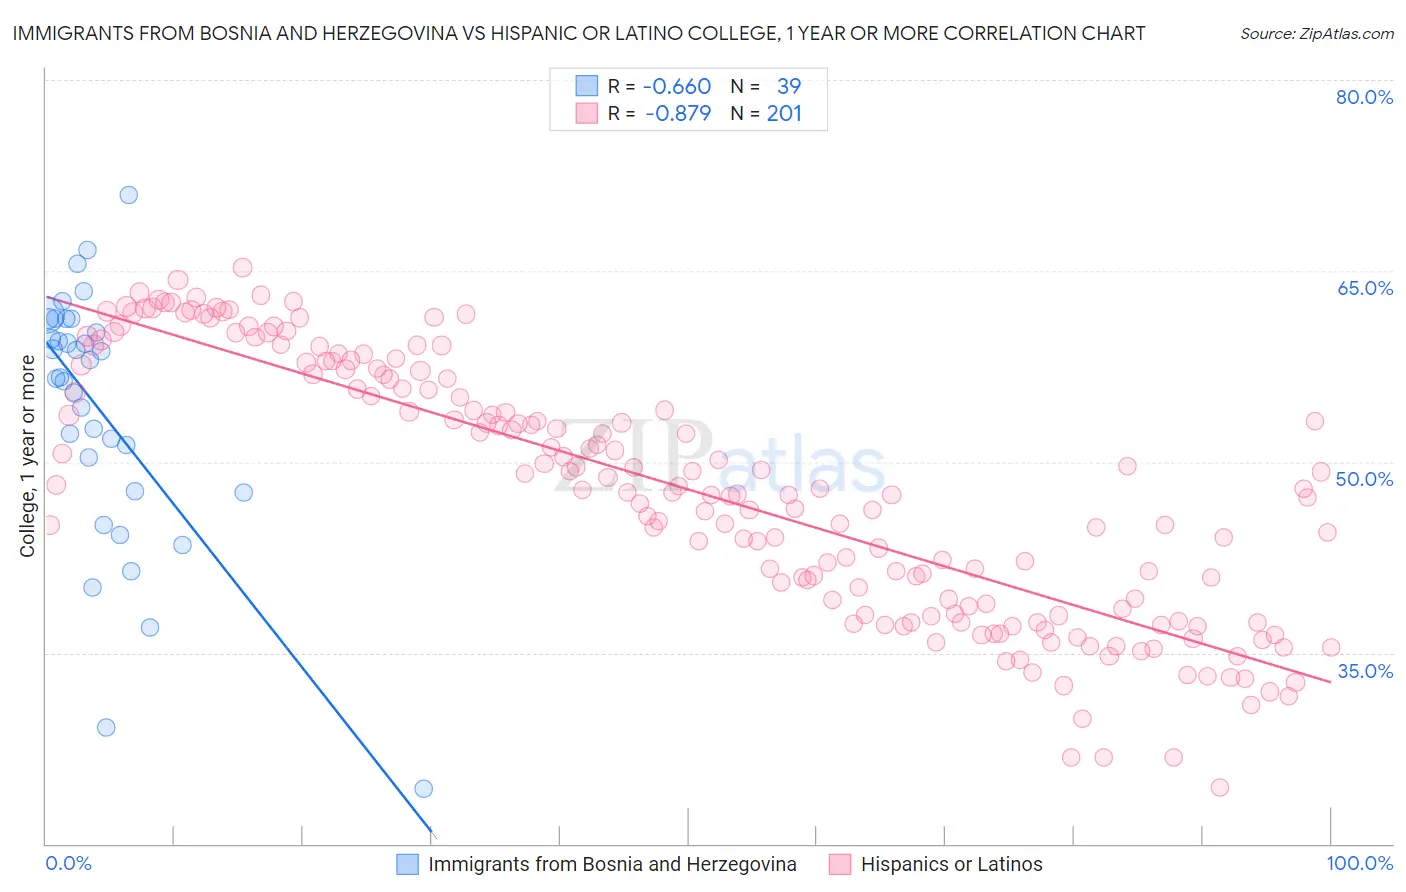 Immigrants from Bosnia and Herzegovina vs Hispanic or Latino College, 1 year or more